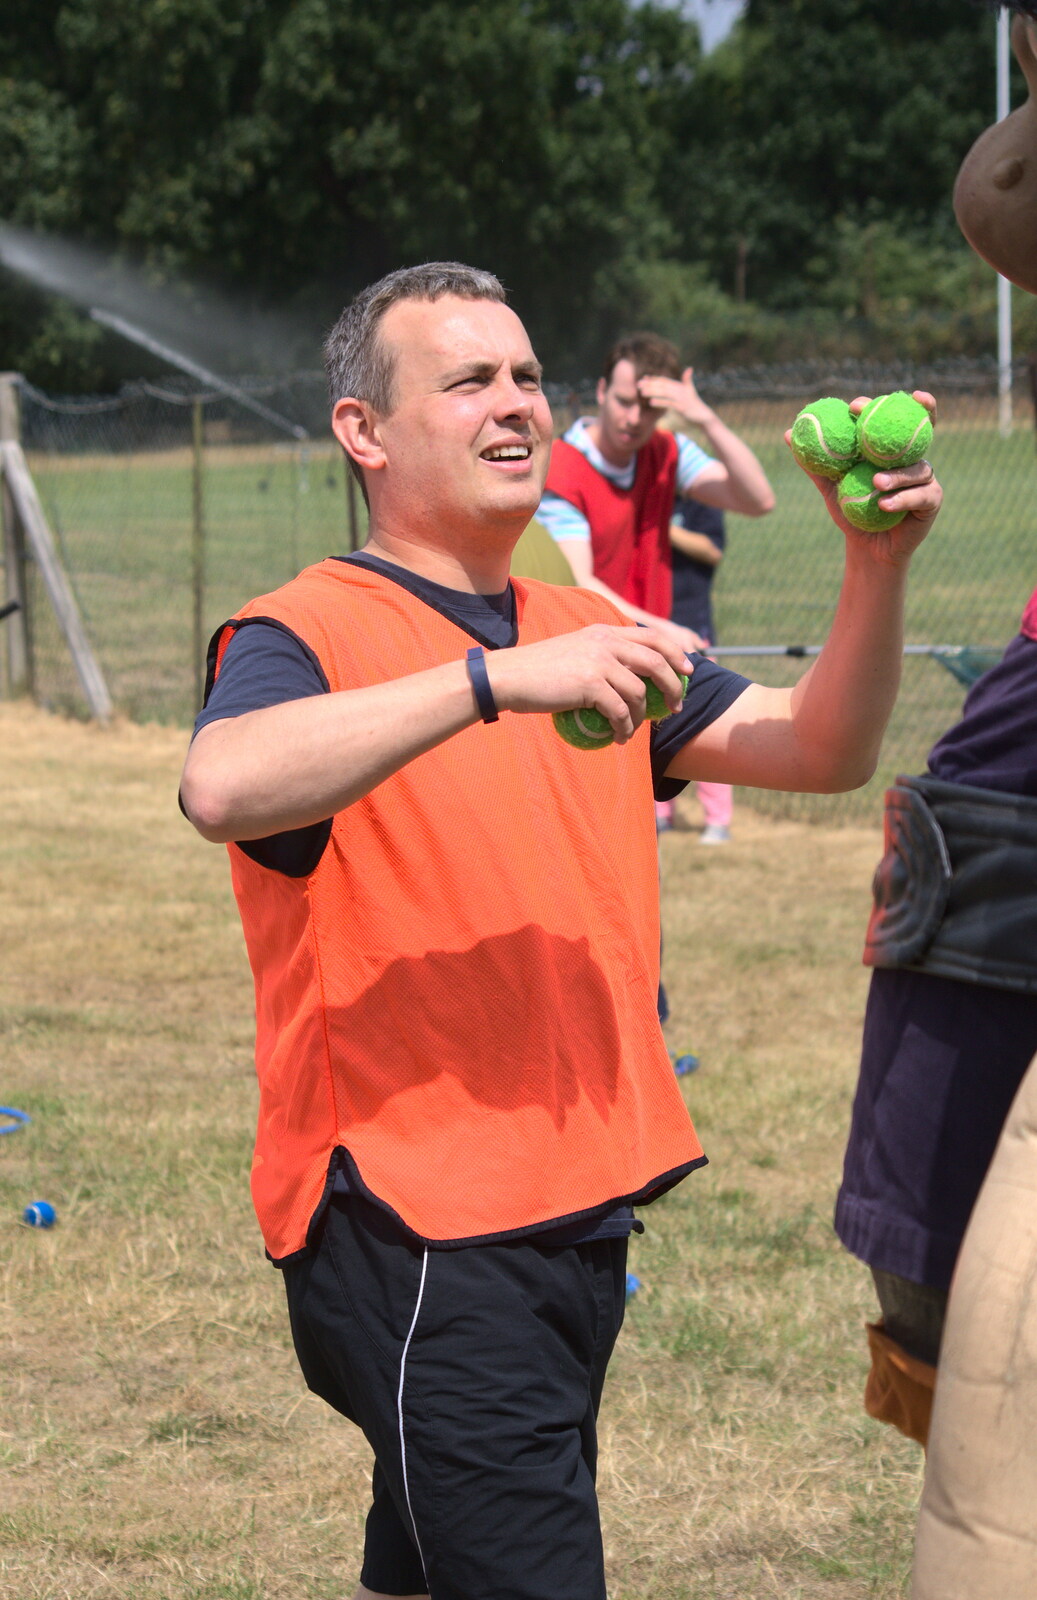 James collects tennis balls from It's a SwiftKey Knockout, Richmond Rugby Club, Richmond, Surrey - 7th July 2015